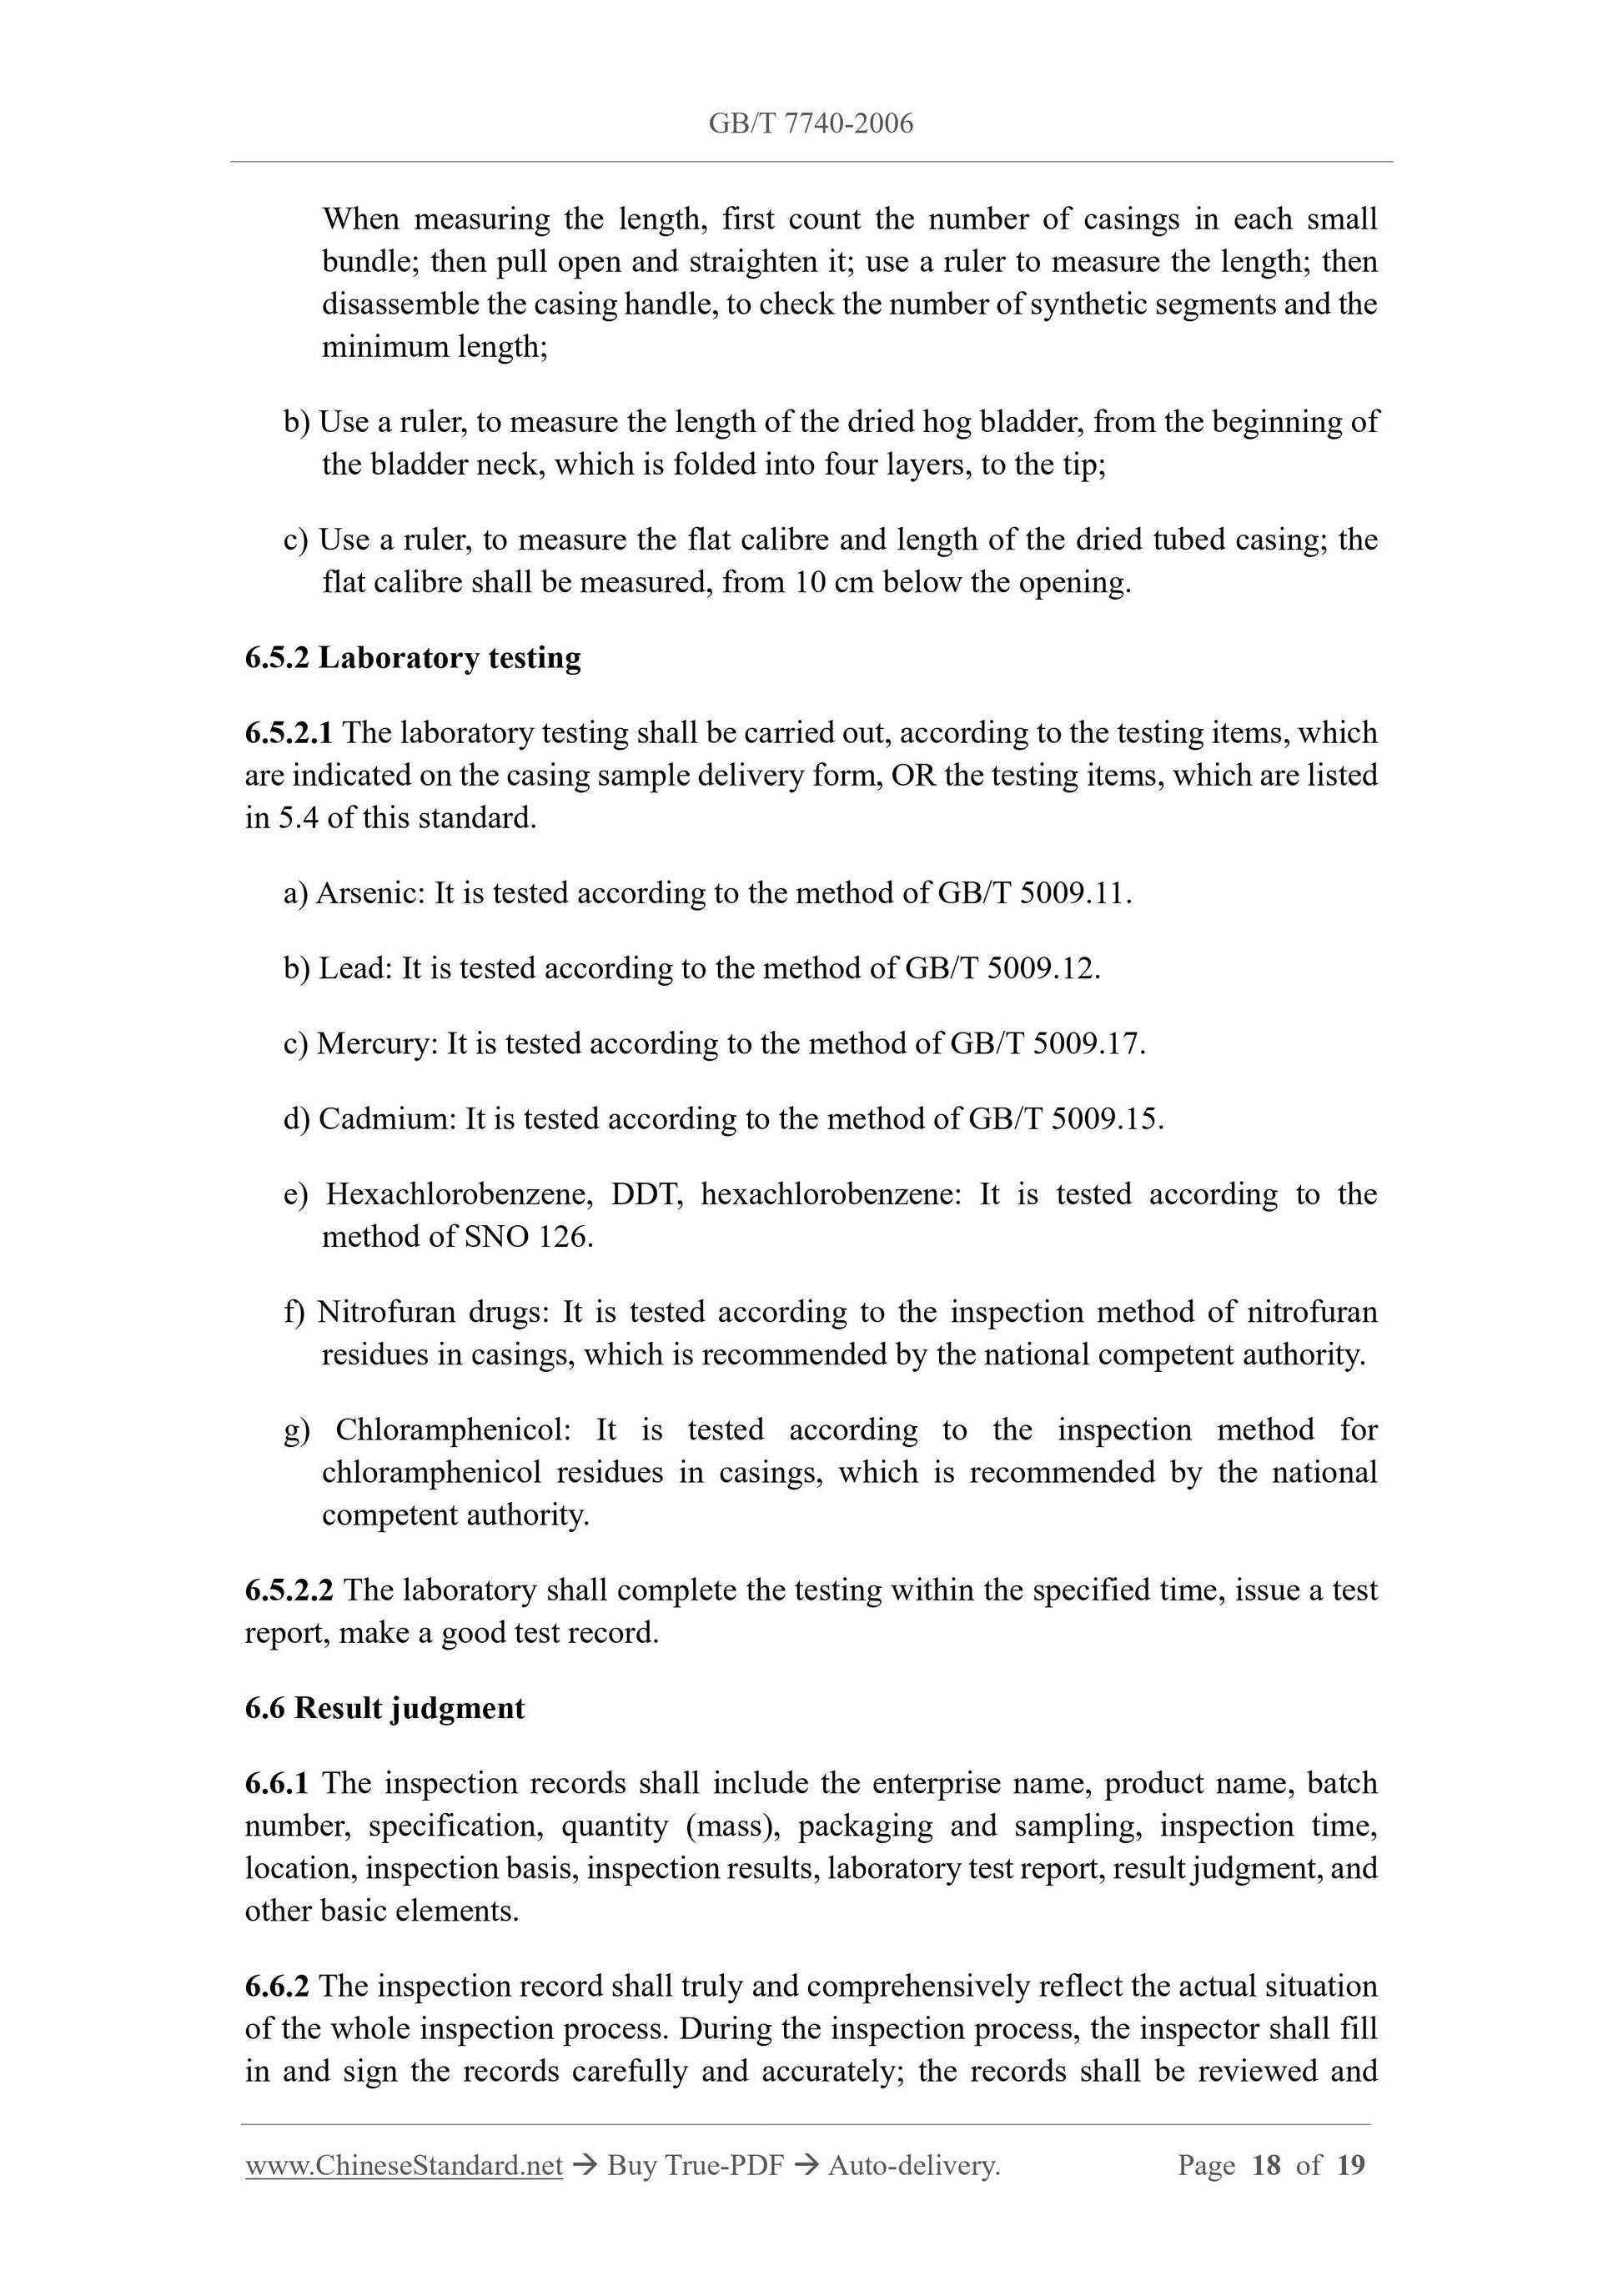 GB/T 7740-2006 Page 7